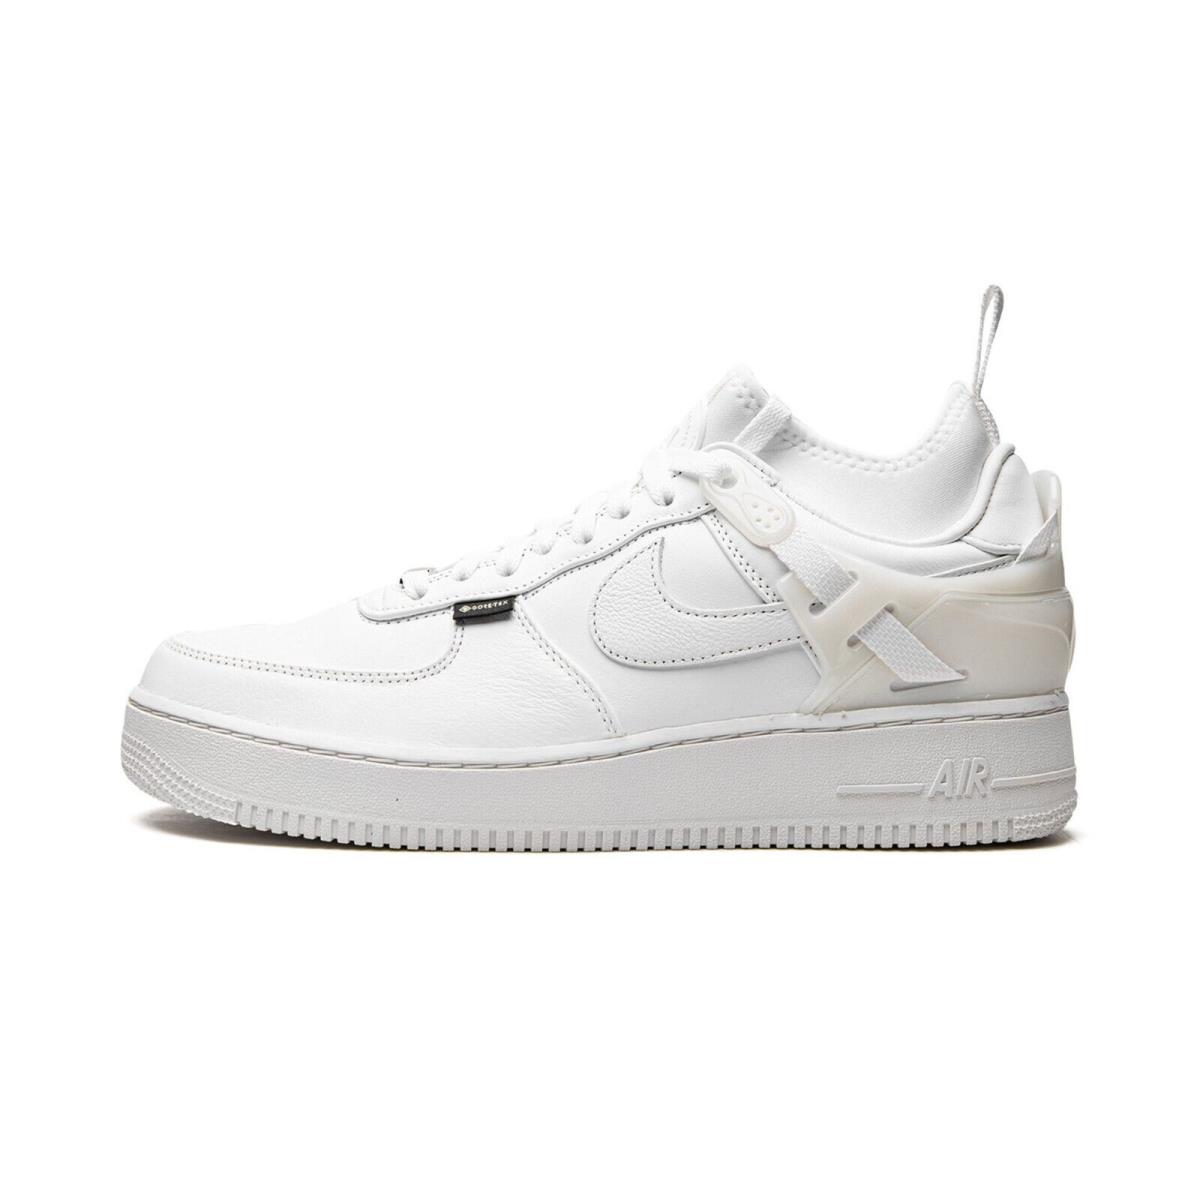 Nike Men`s Air Force 1 Low SP Undercover Jun Takahashi Leather Shoes DQ7558-101 - White